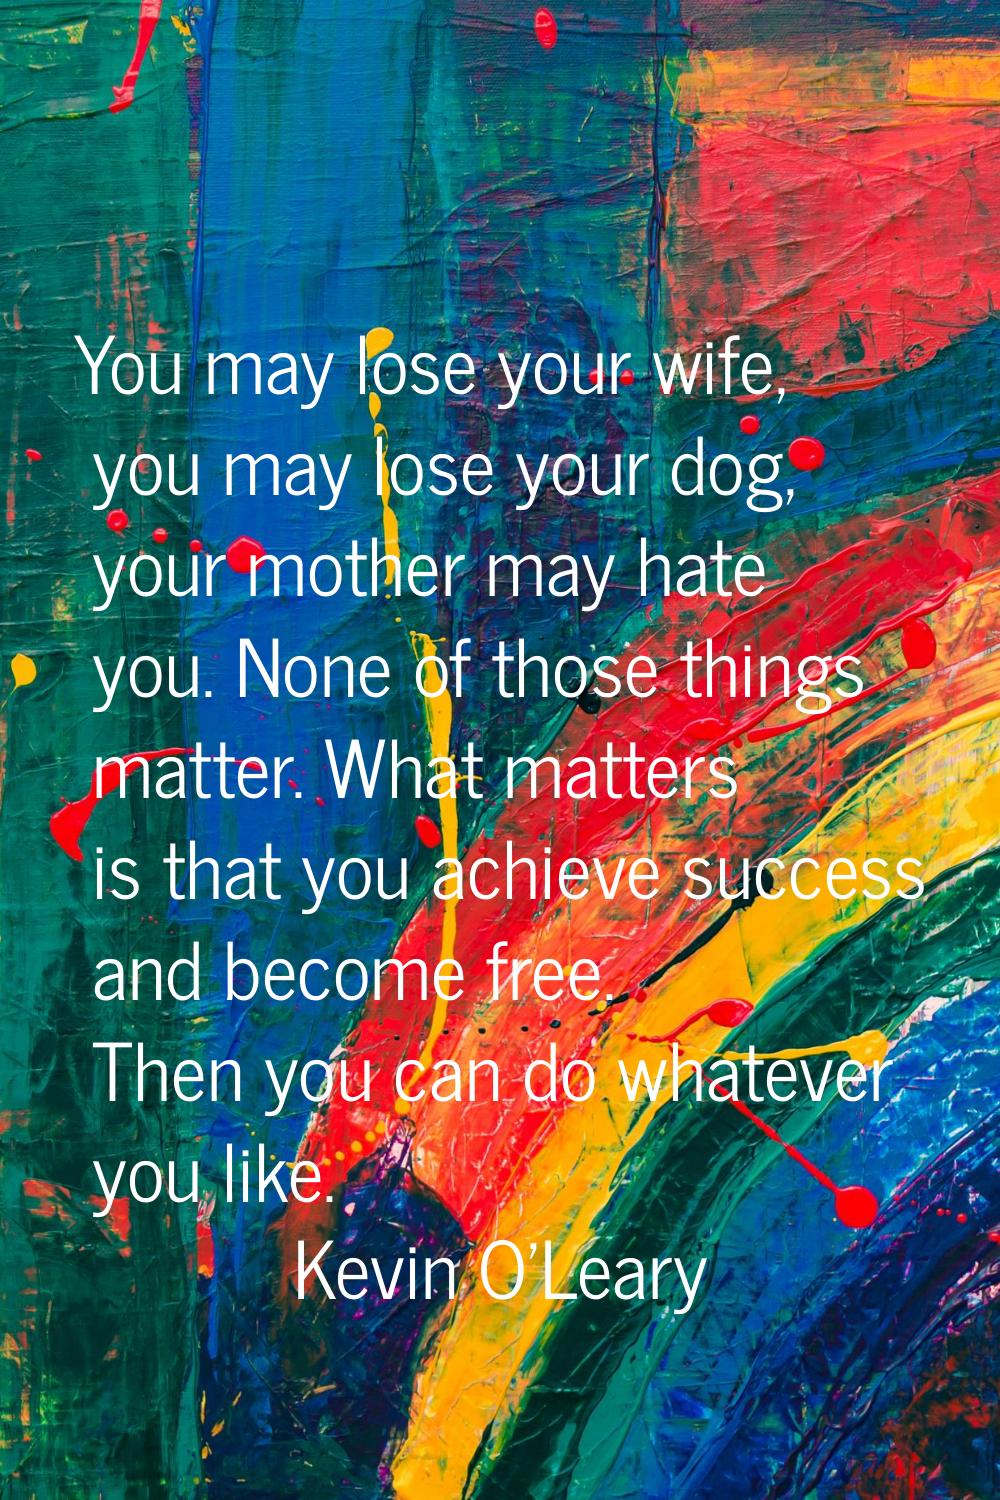 You may lose your wife, you may lose your dog, your mother may hate you. None of those things matte